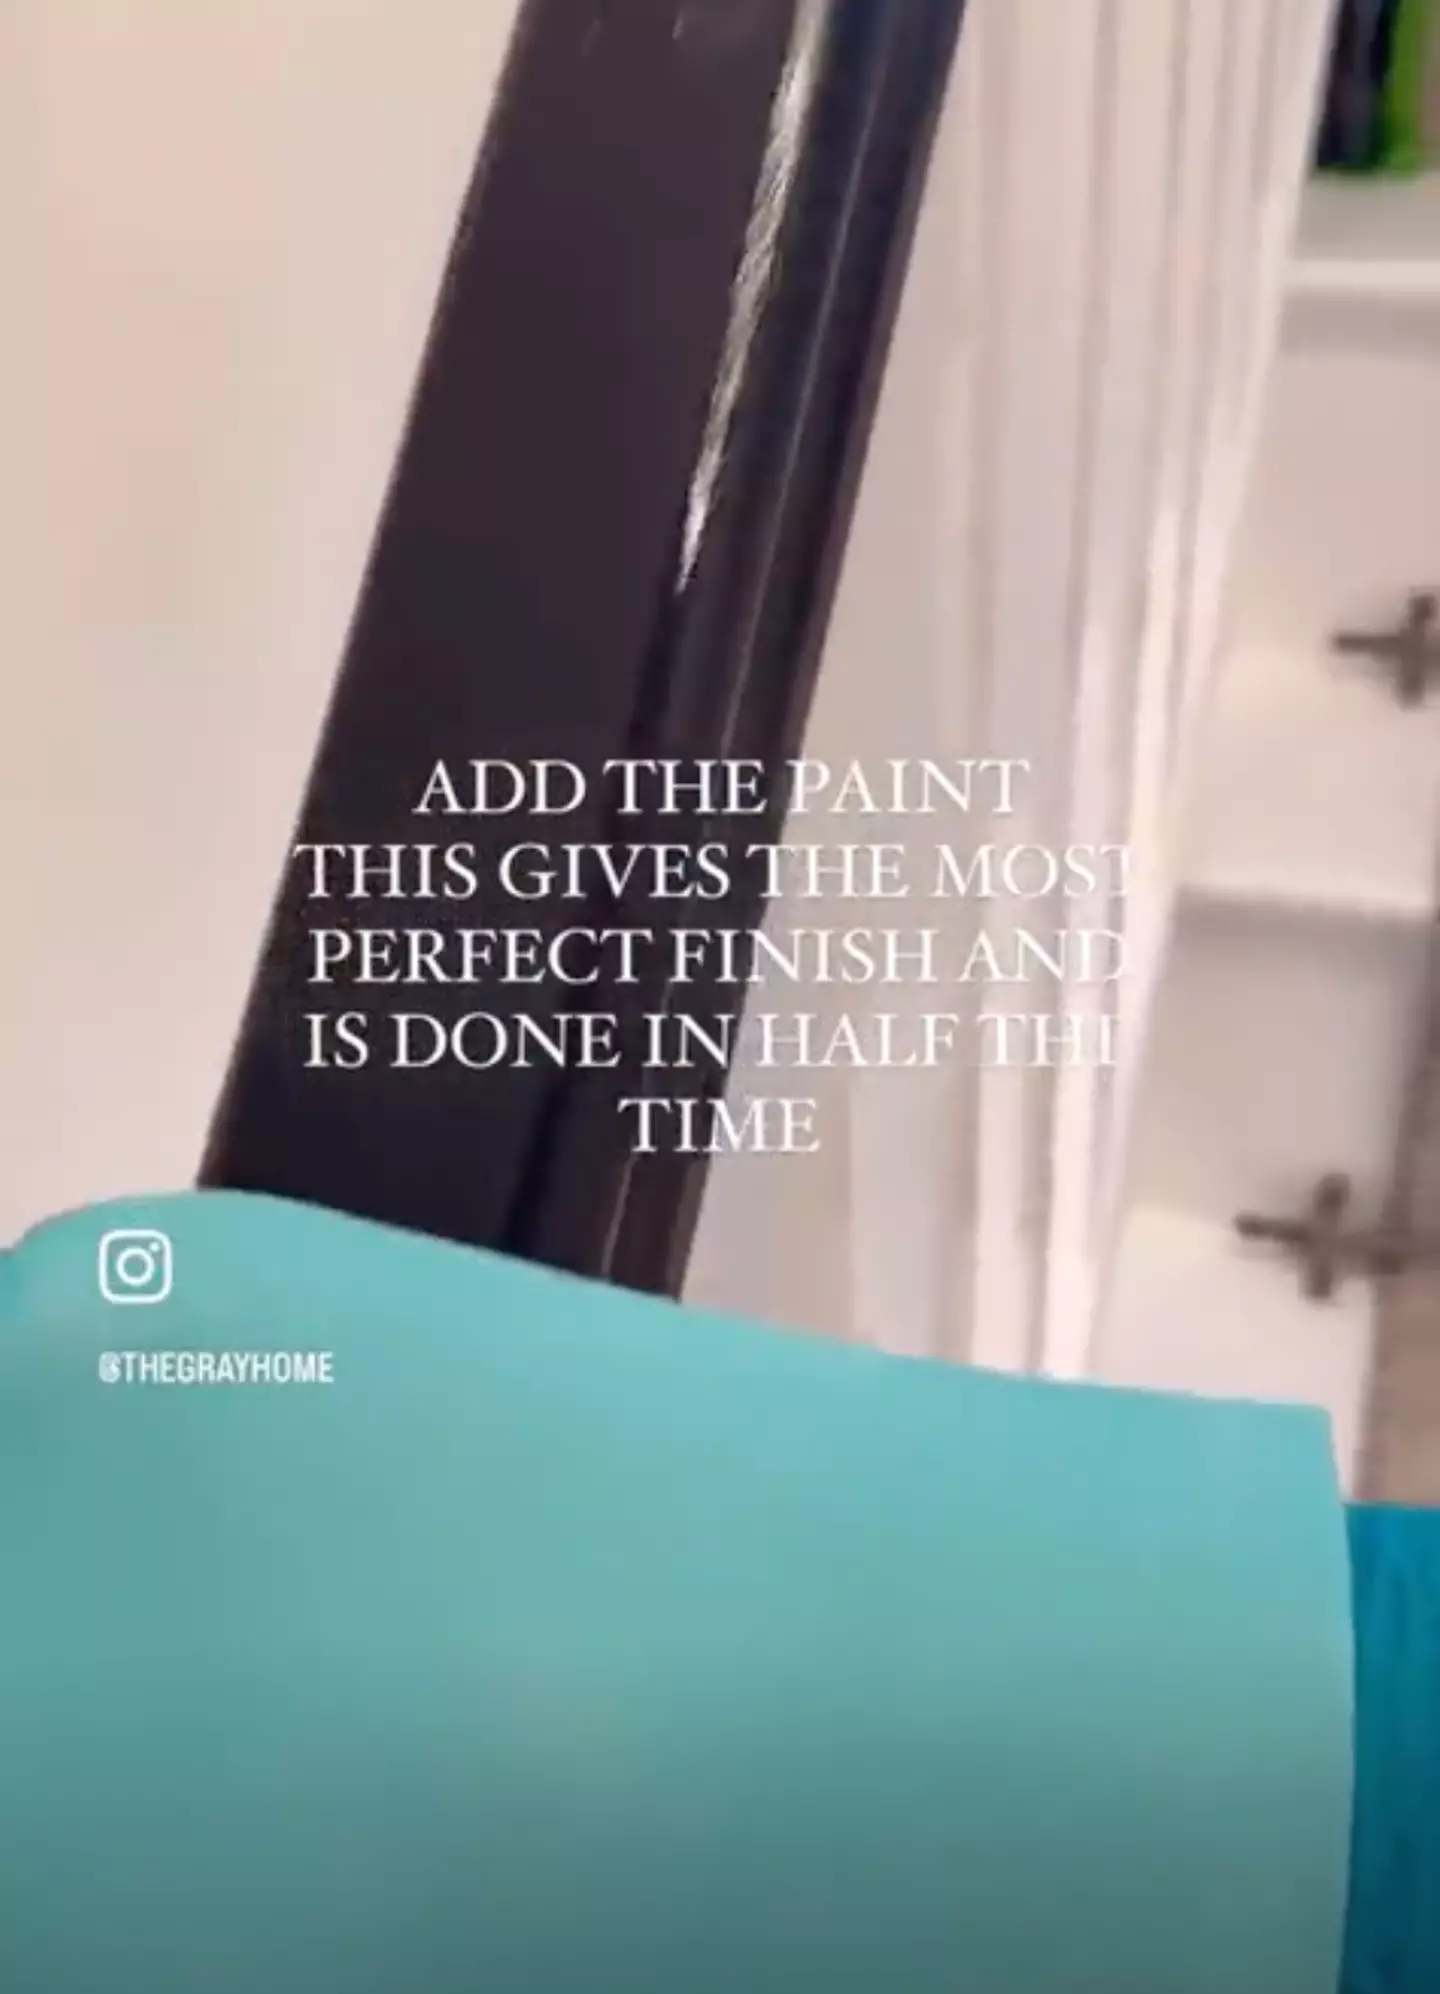 TikTok users were stunned by the paint hack.